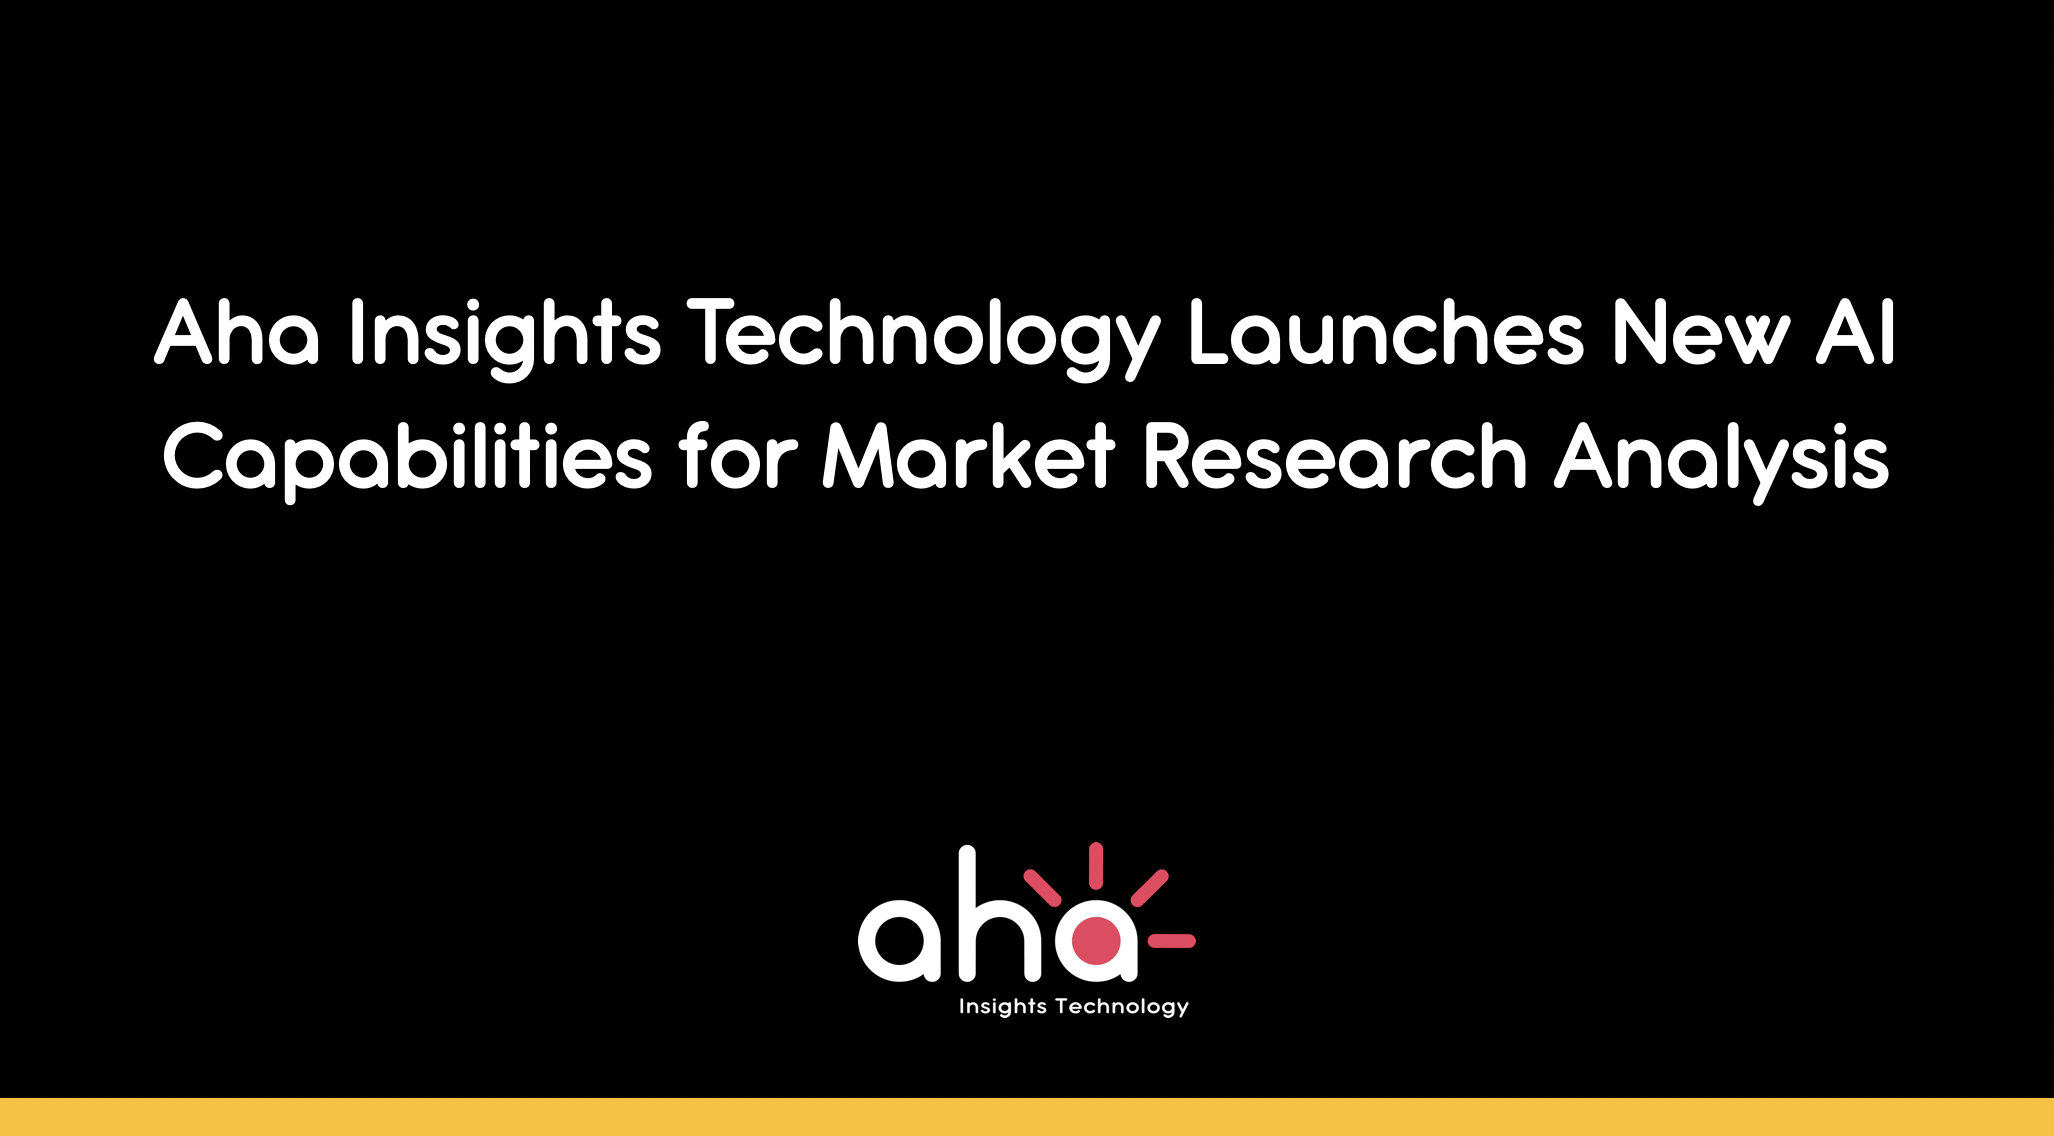 Aha Insights Technology Launches New AI Capabilities for Market Research